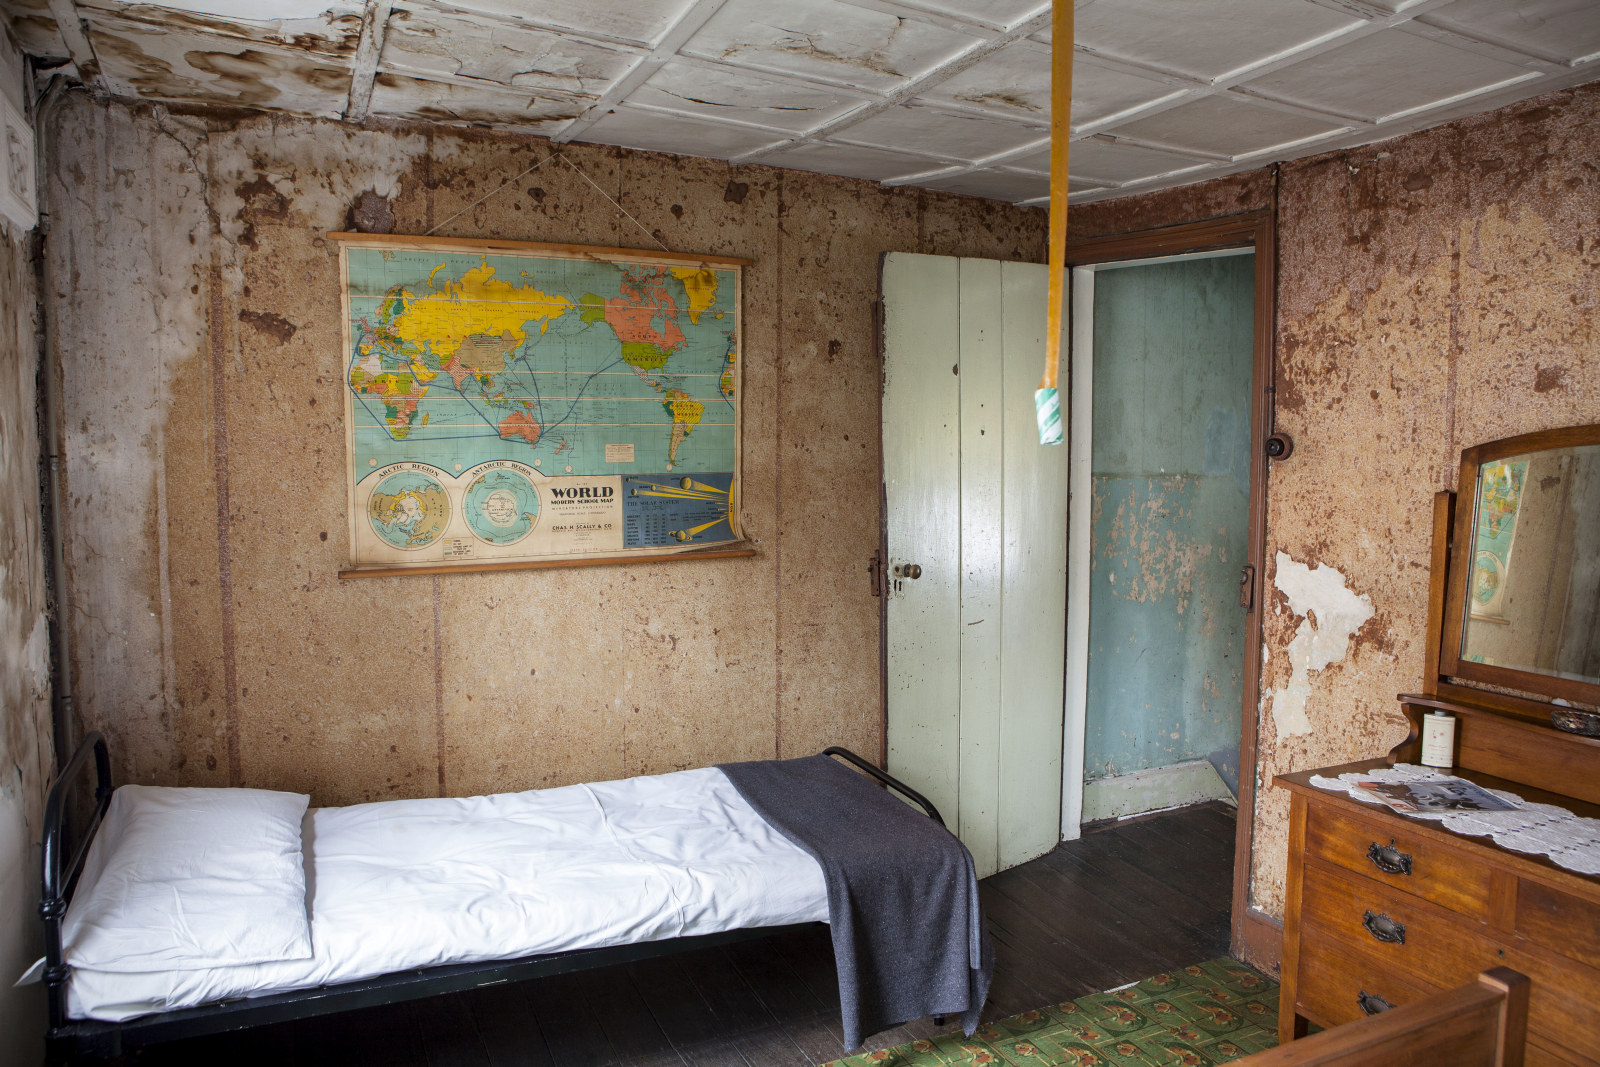 View of a bedroom with faded and torn wallpaper with an old map of the world on one wall, a single bed, dressing table and view through a door to the top of a staircase, with faded and damaged paintwork.